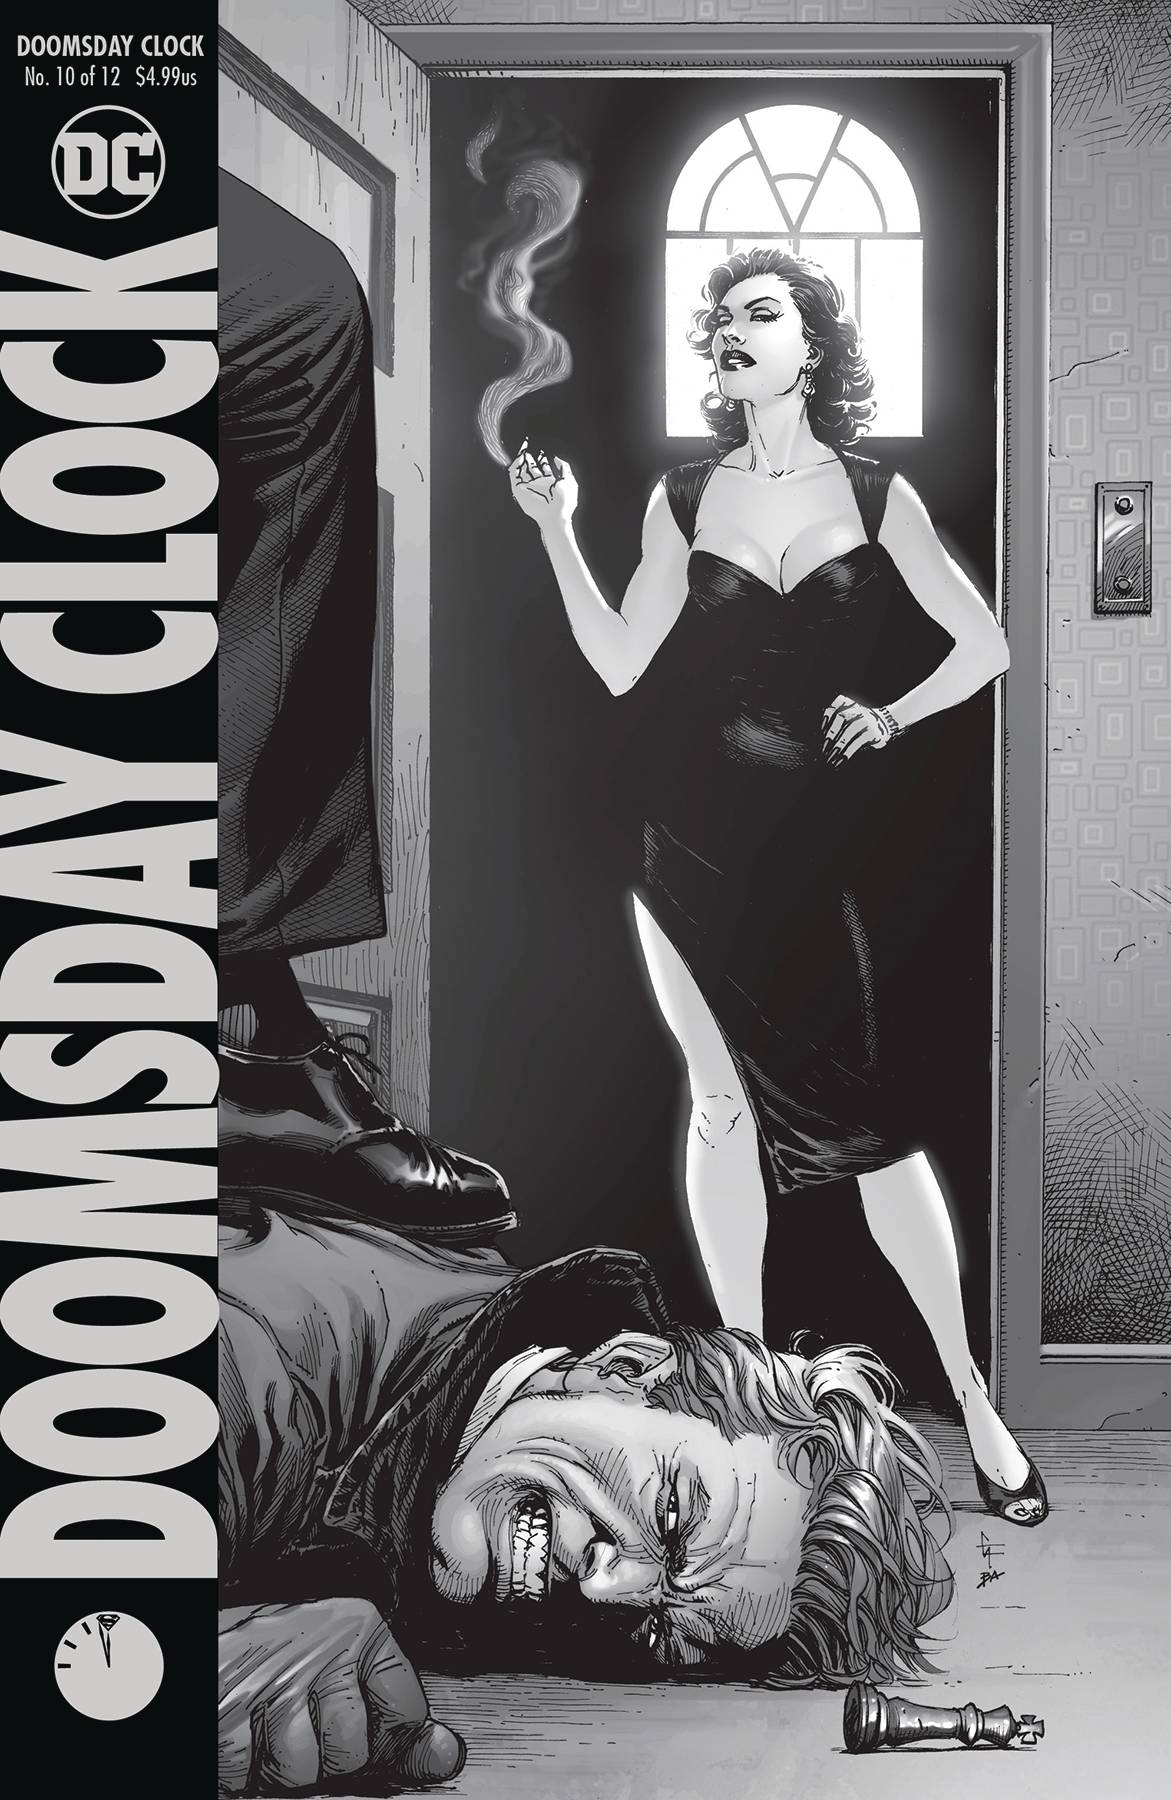 DOOMSDAY CLOCK #10 (OF 12) - State of Comics